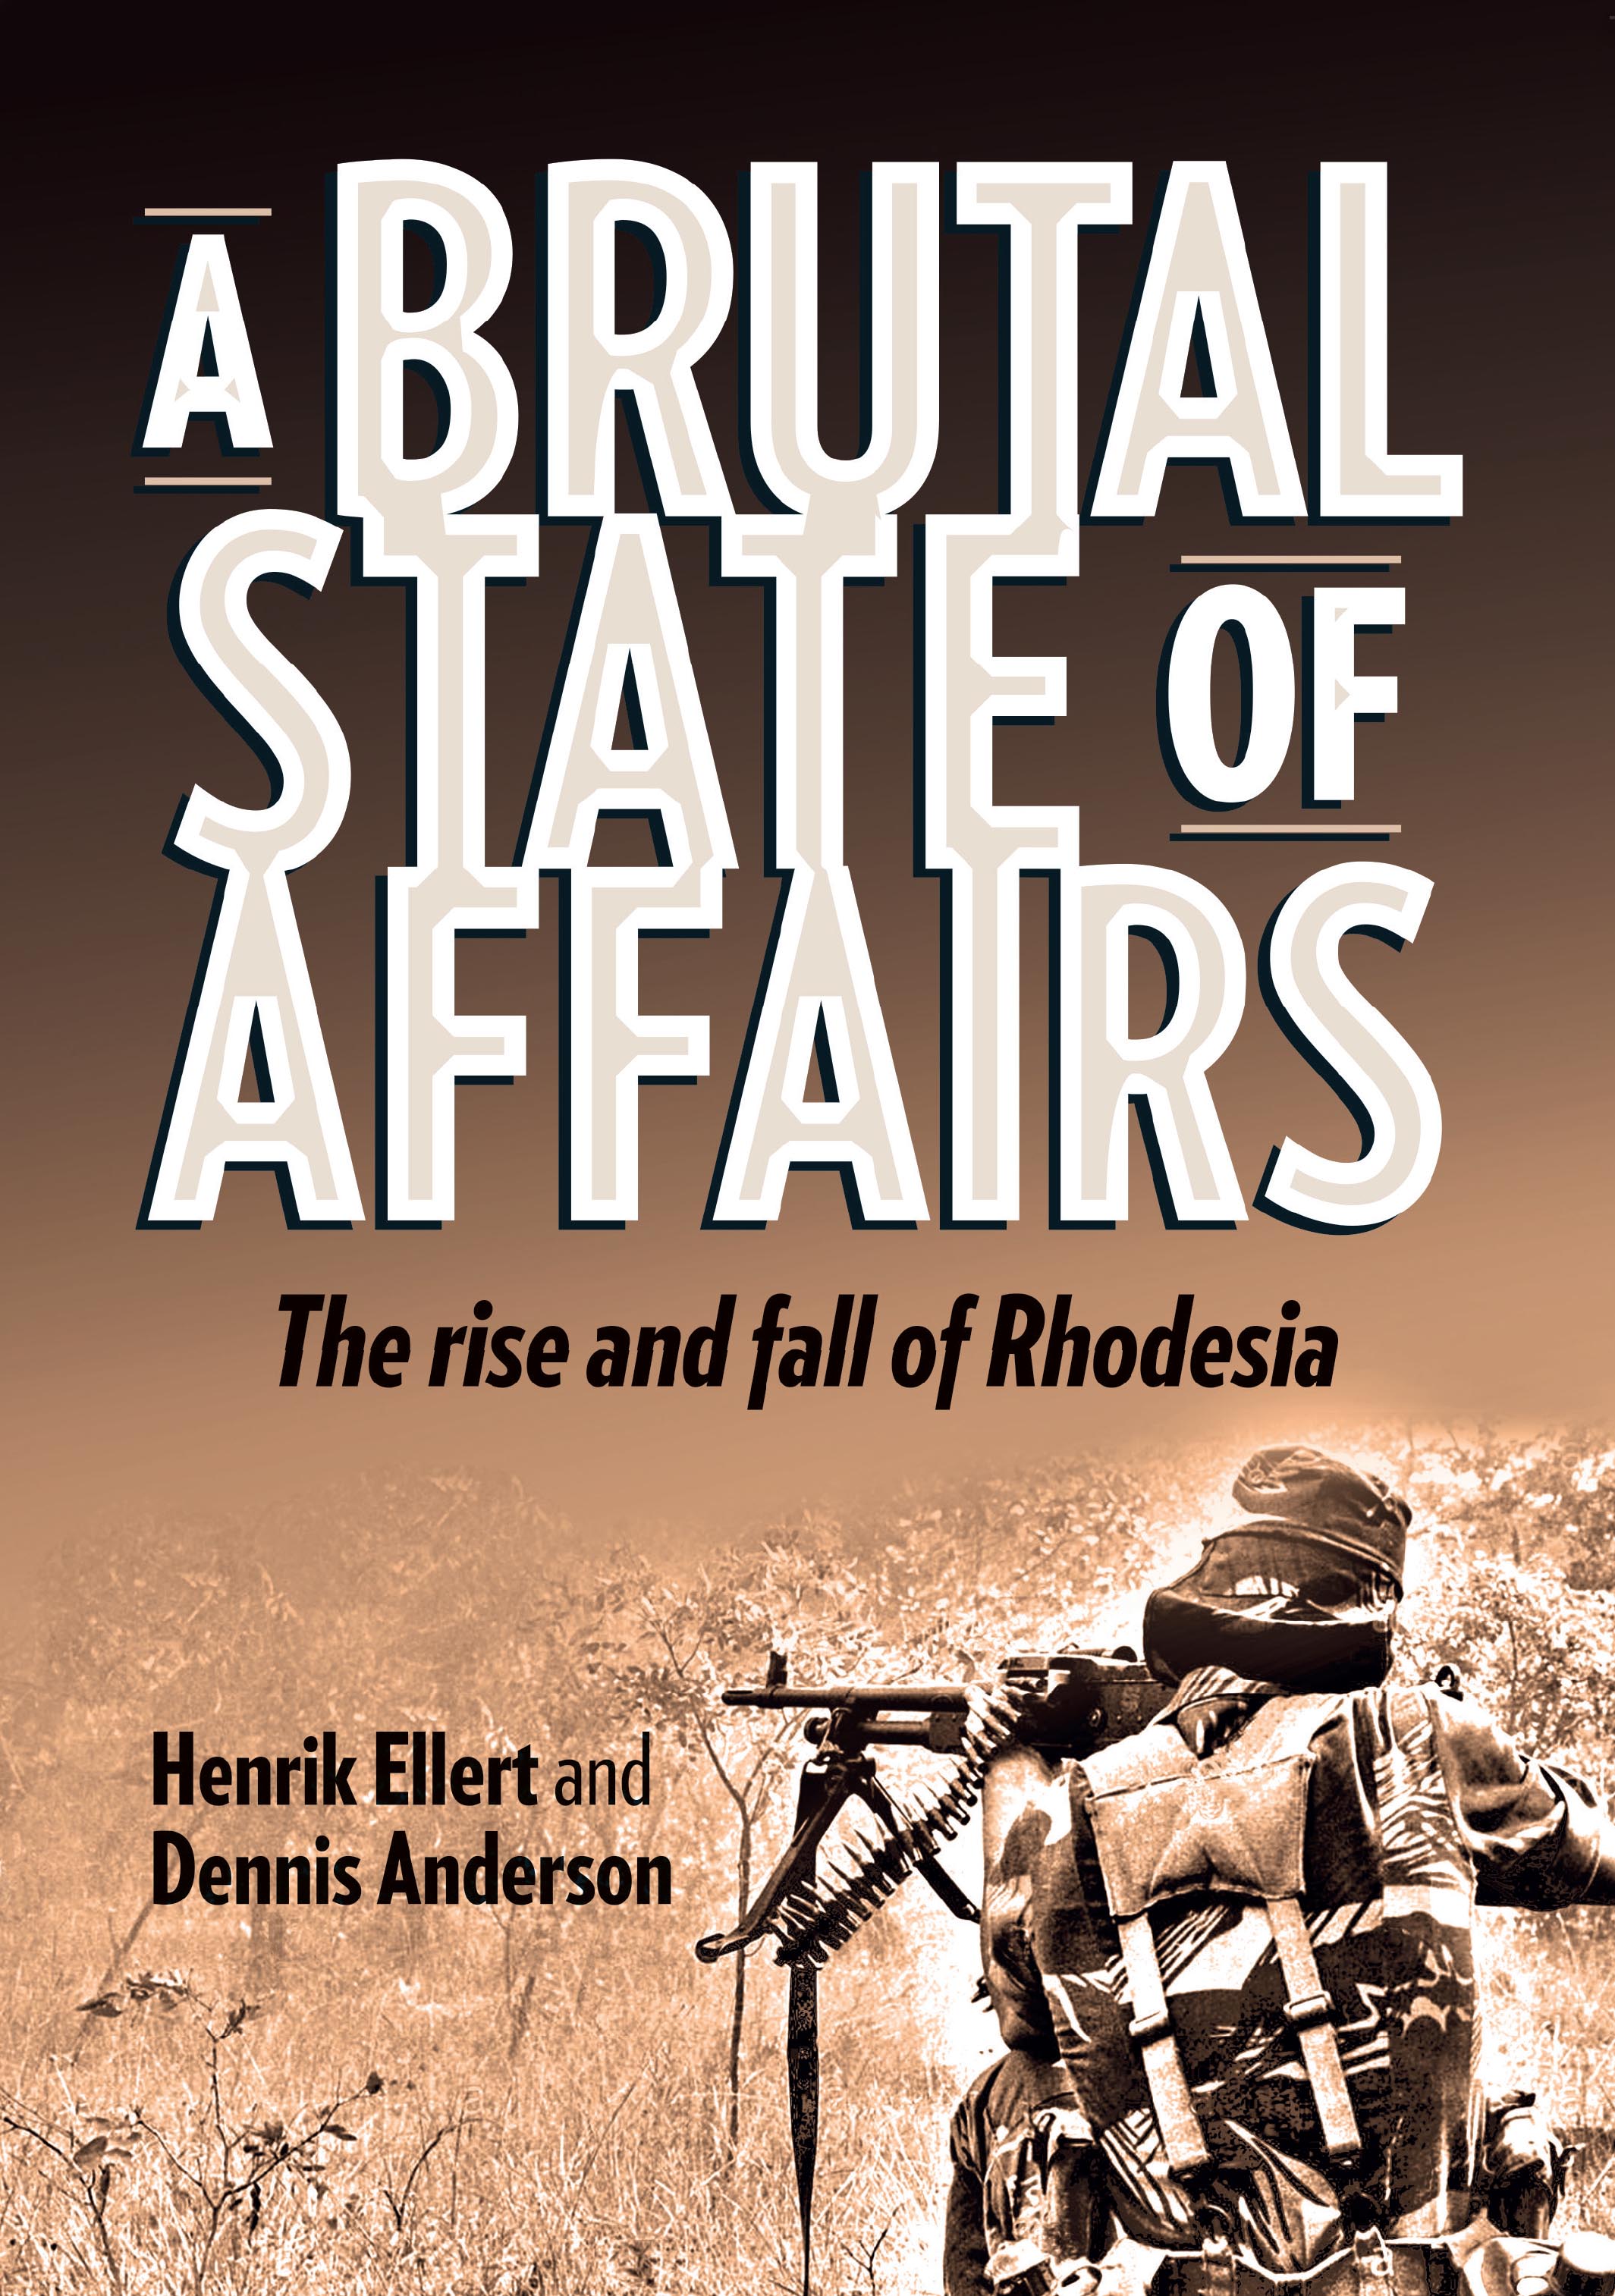 A-Brutal-State-of-Affairs--The-Rise-and-Fall-of-Rhodesia